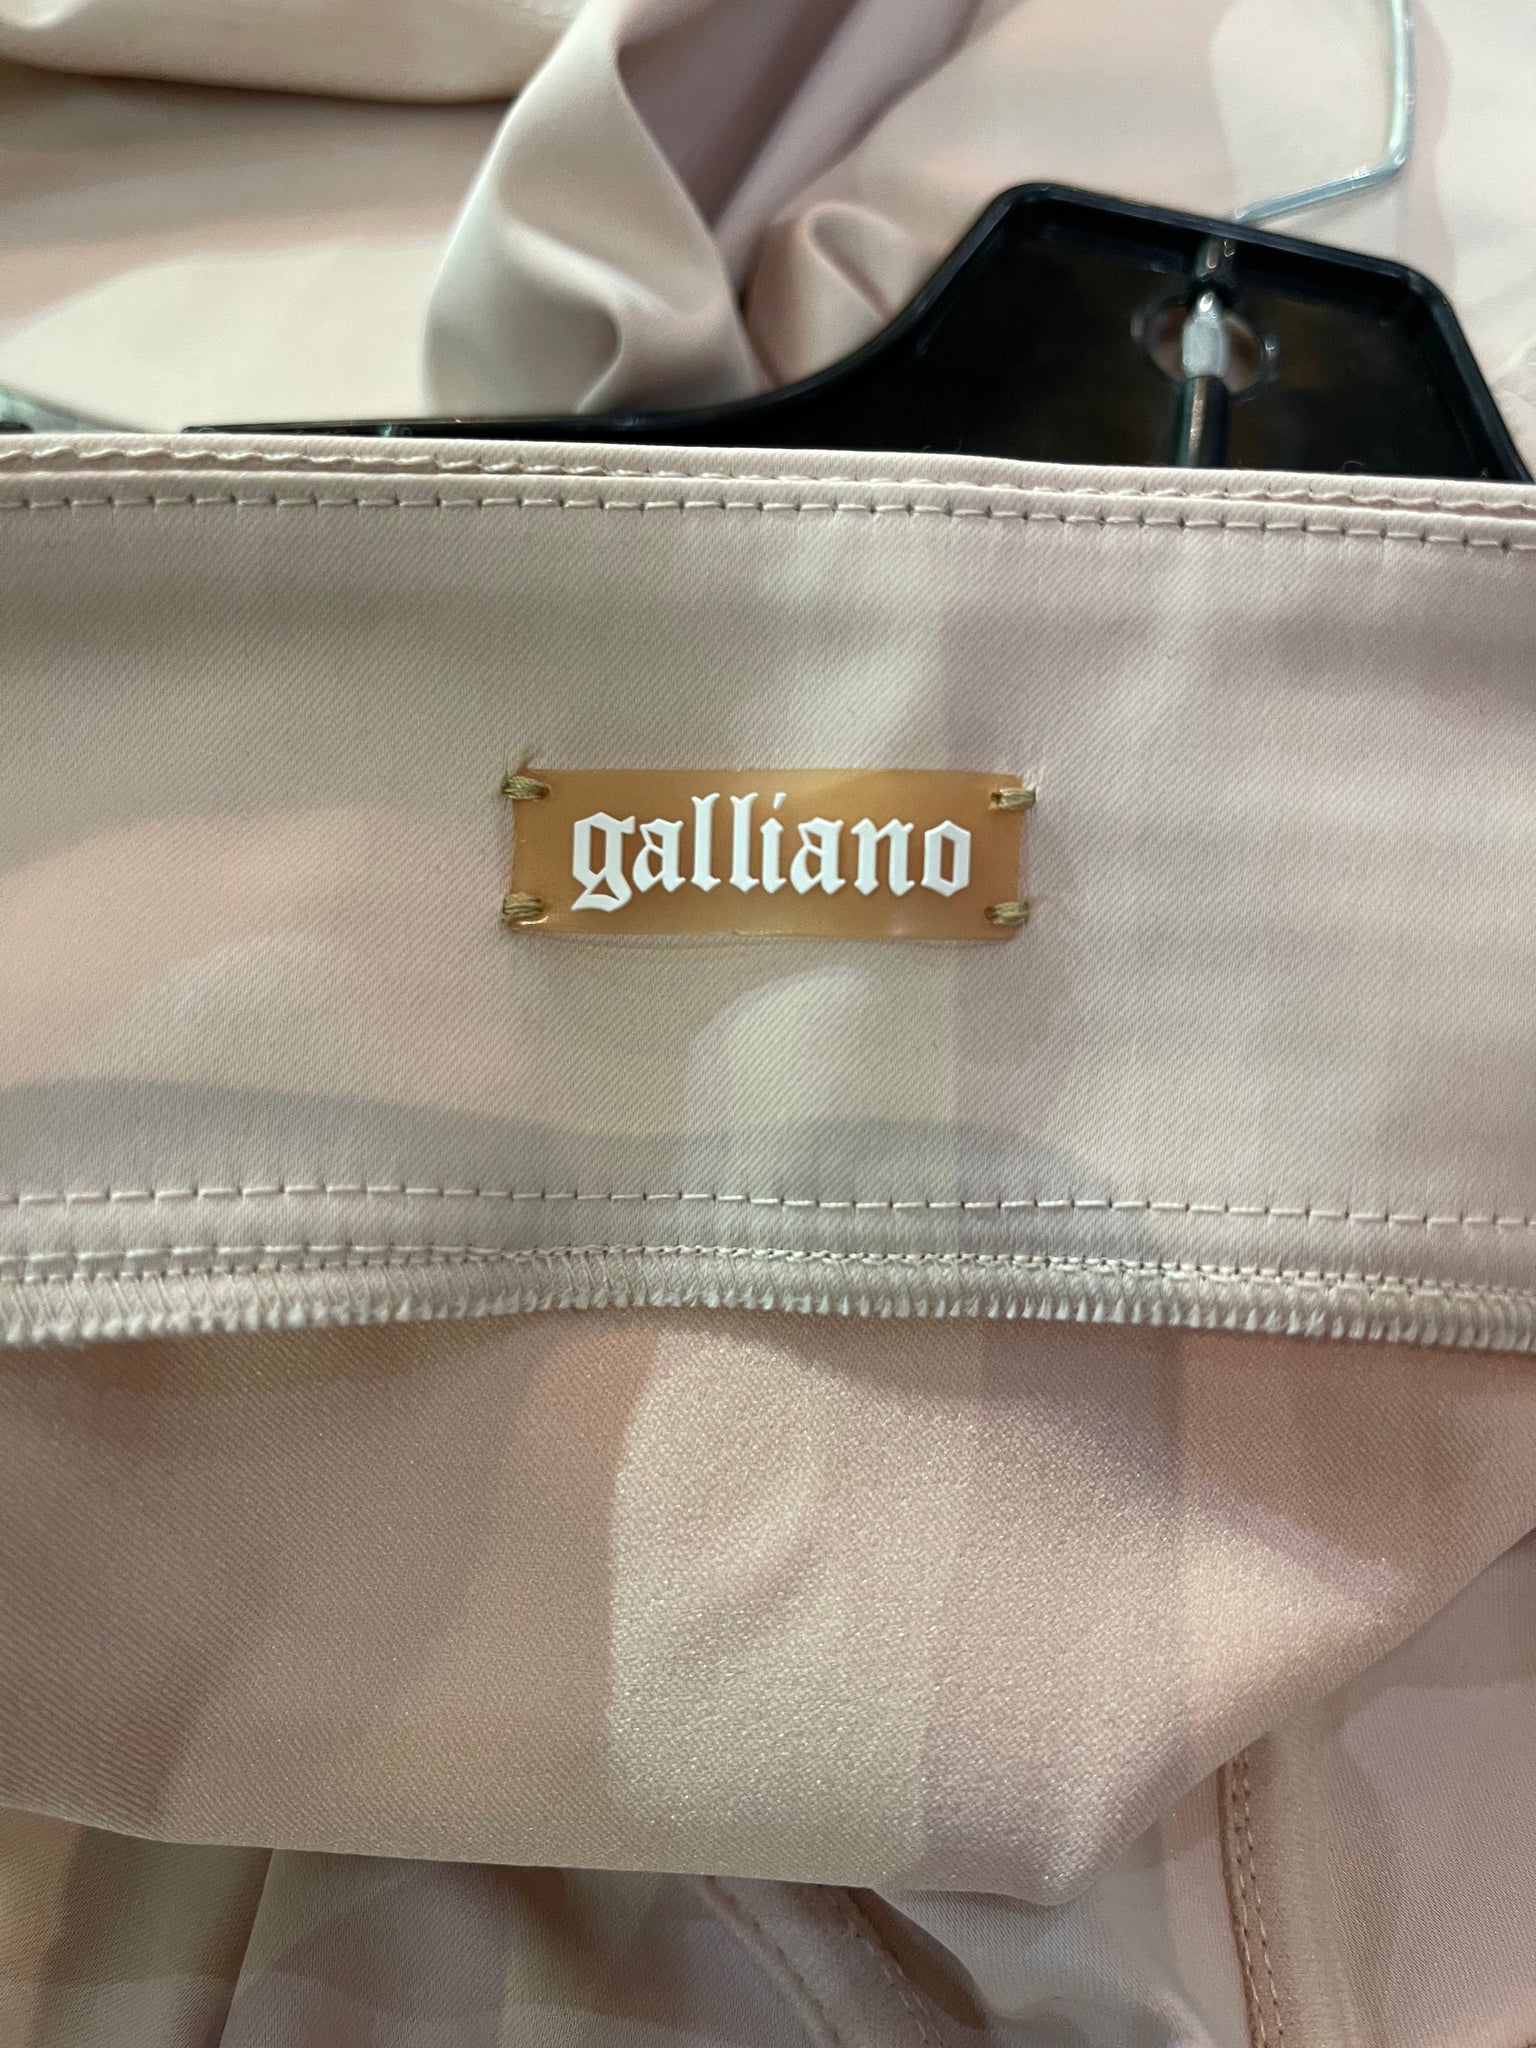    John  Galliano Early 2000s Pink Lingerie "Girdle"Dress LABEL 5 of 5